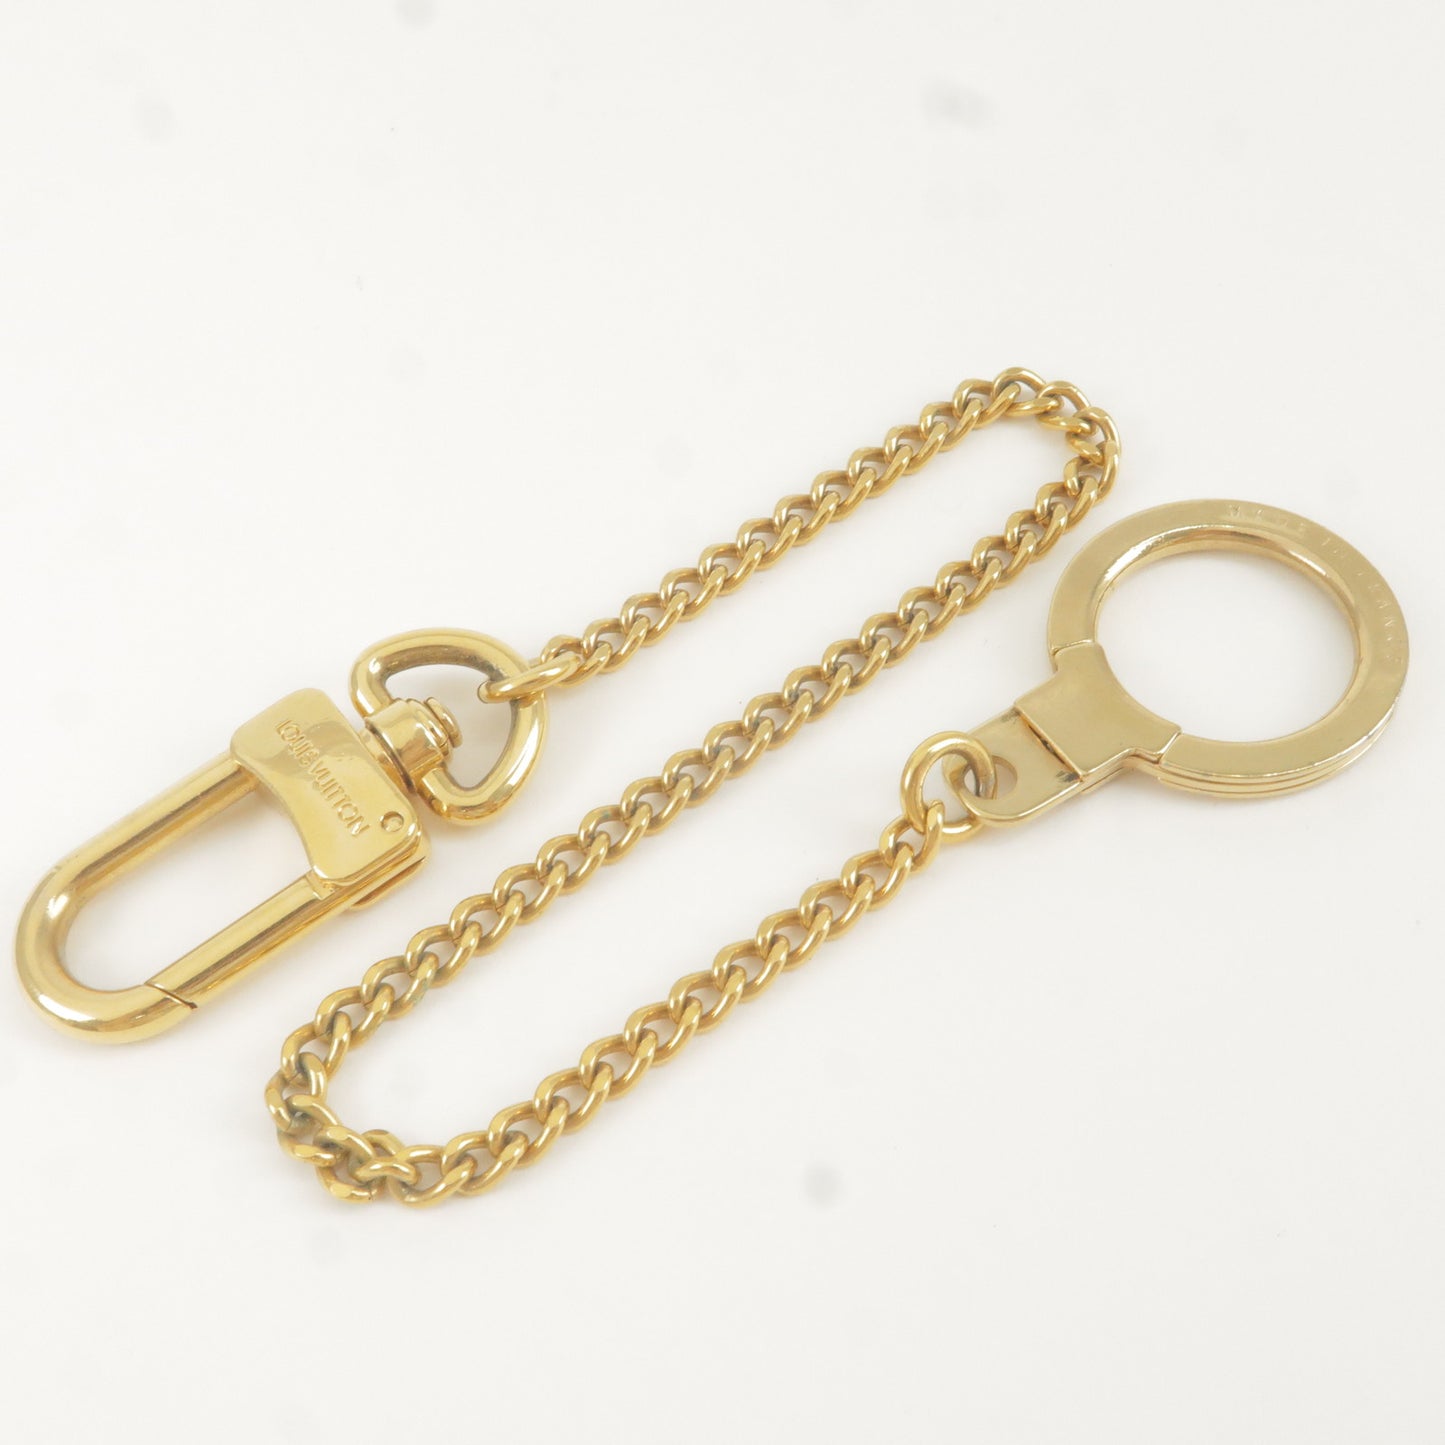 Authentic Louis Vuitton Chenne Ano Cles Key Chain Key Charm Gold M58021 Used F/S